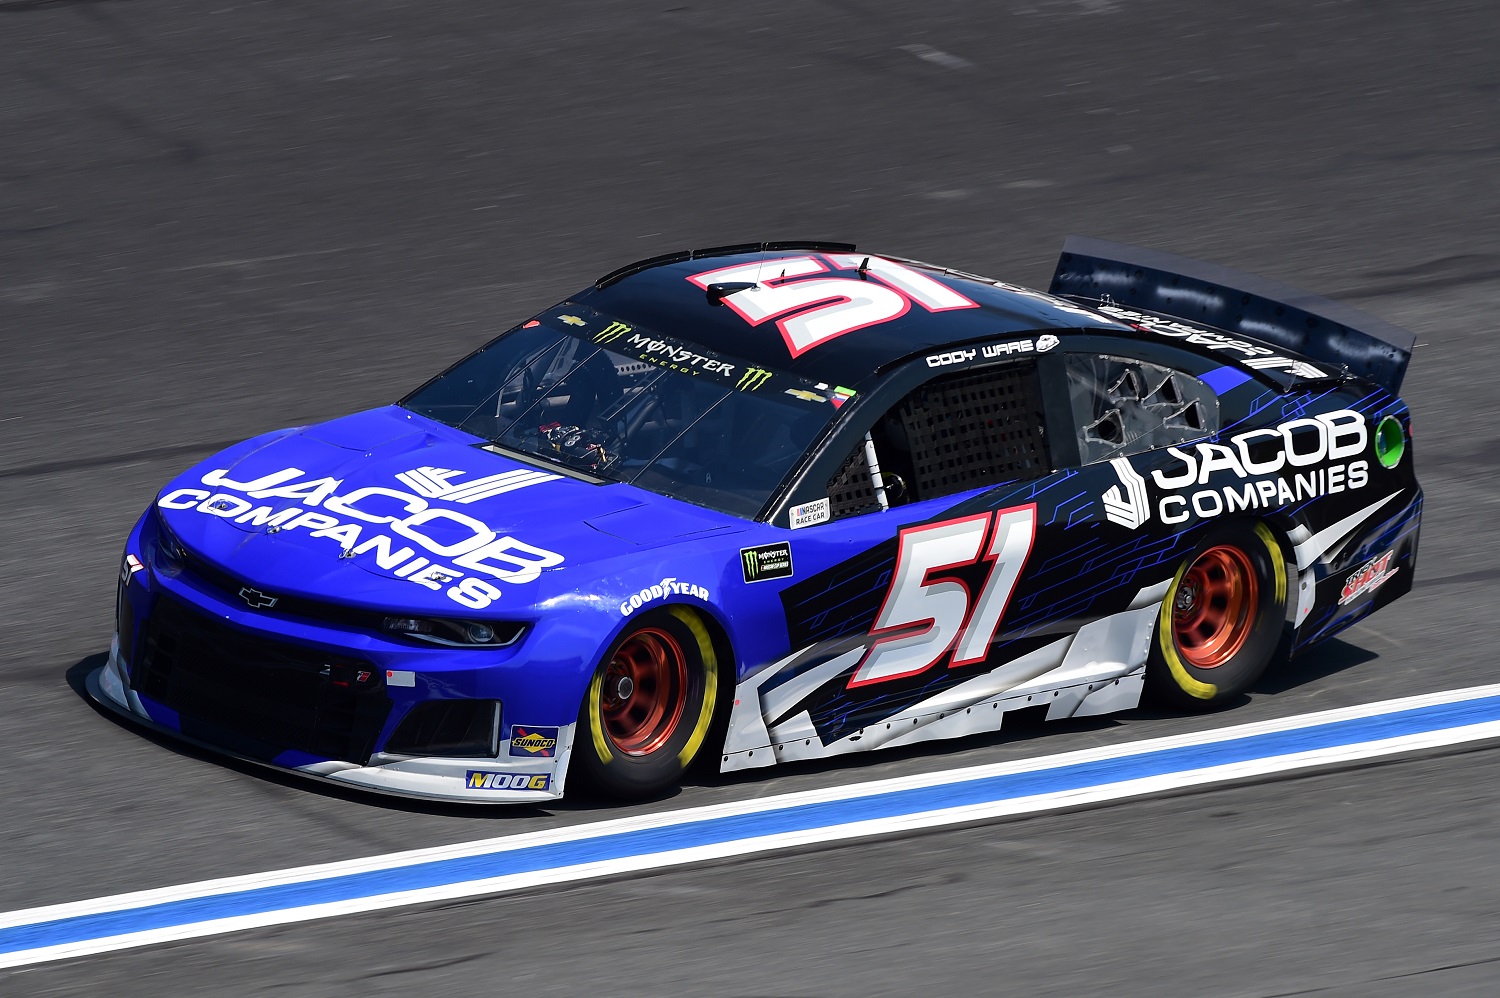 Cody Ware, driver of the No. 51 Chevrolet, practices for the Monster Energy NASCAR Cup Series Bank of America Roval 400 at Charlotte Motor Speedway on Sept. 27, 2019.